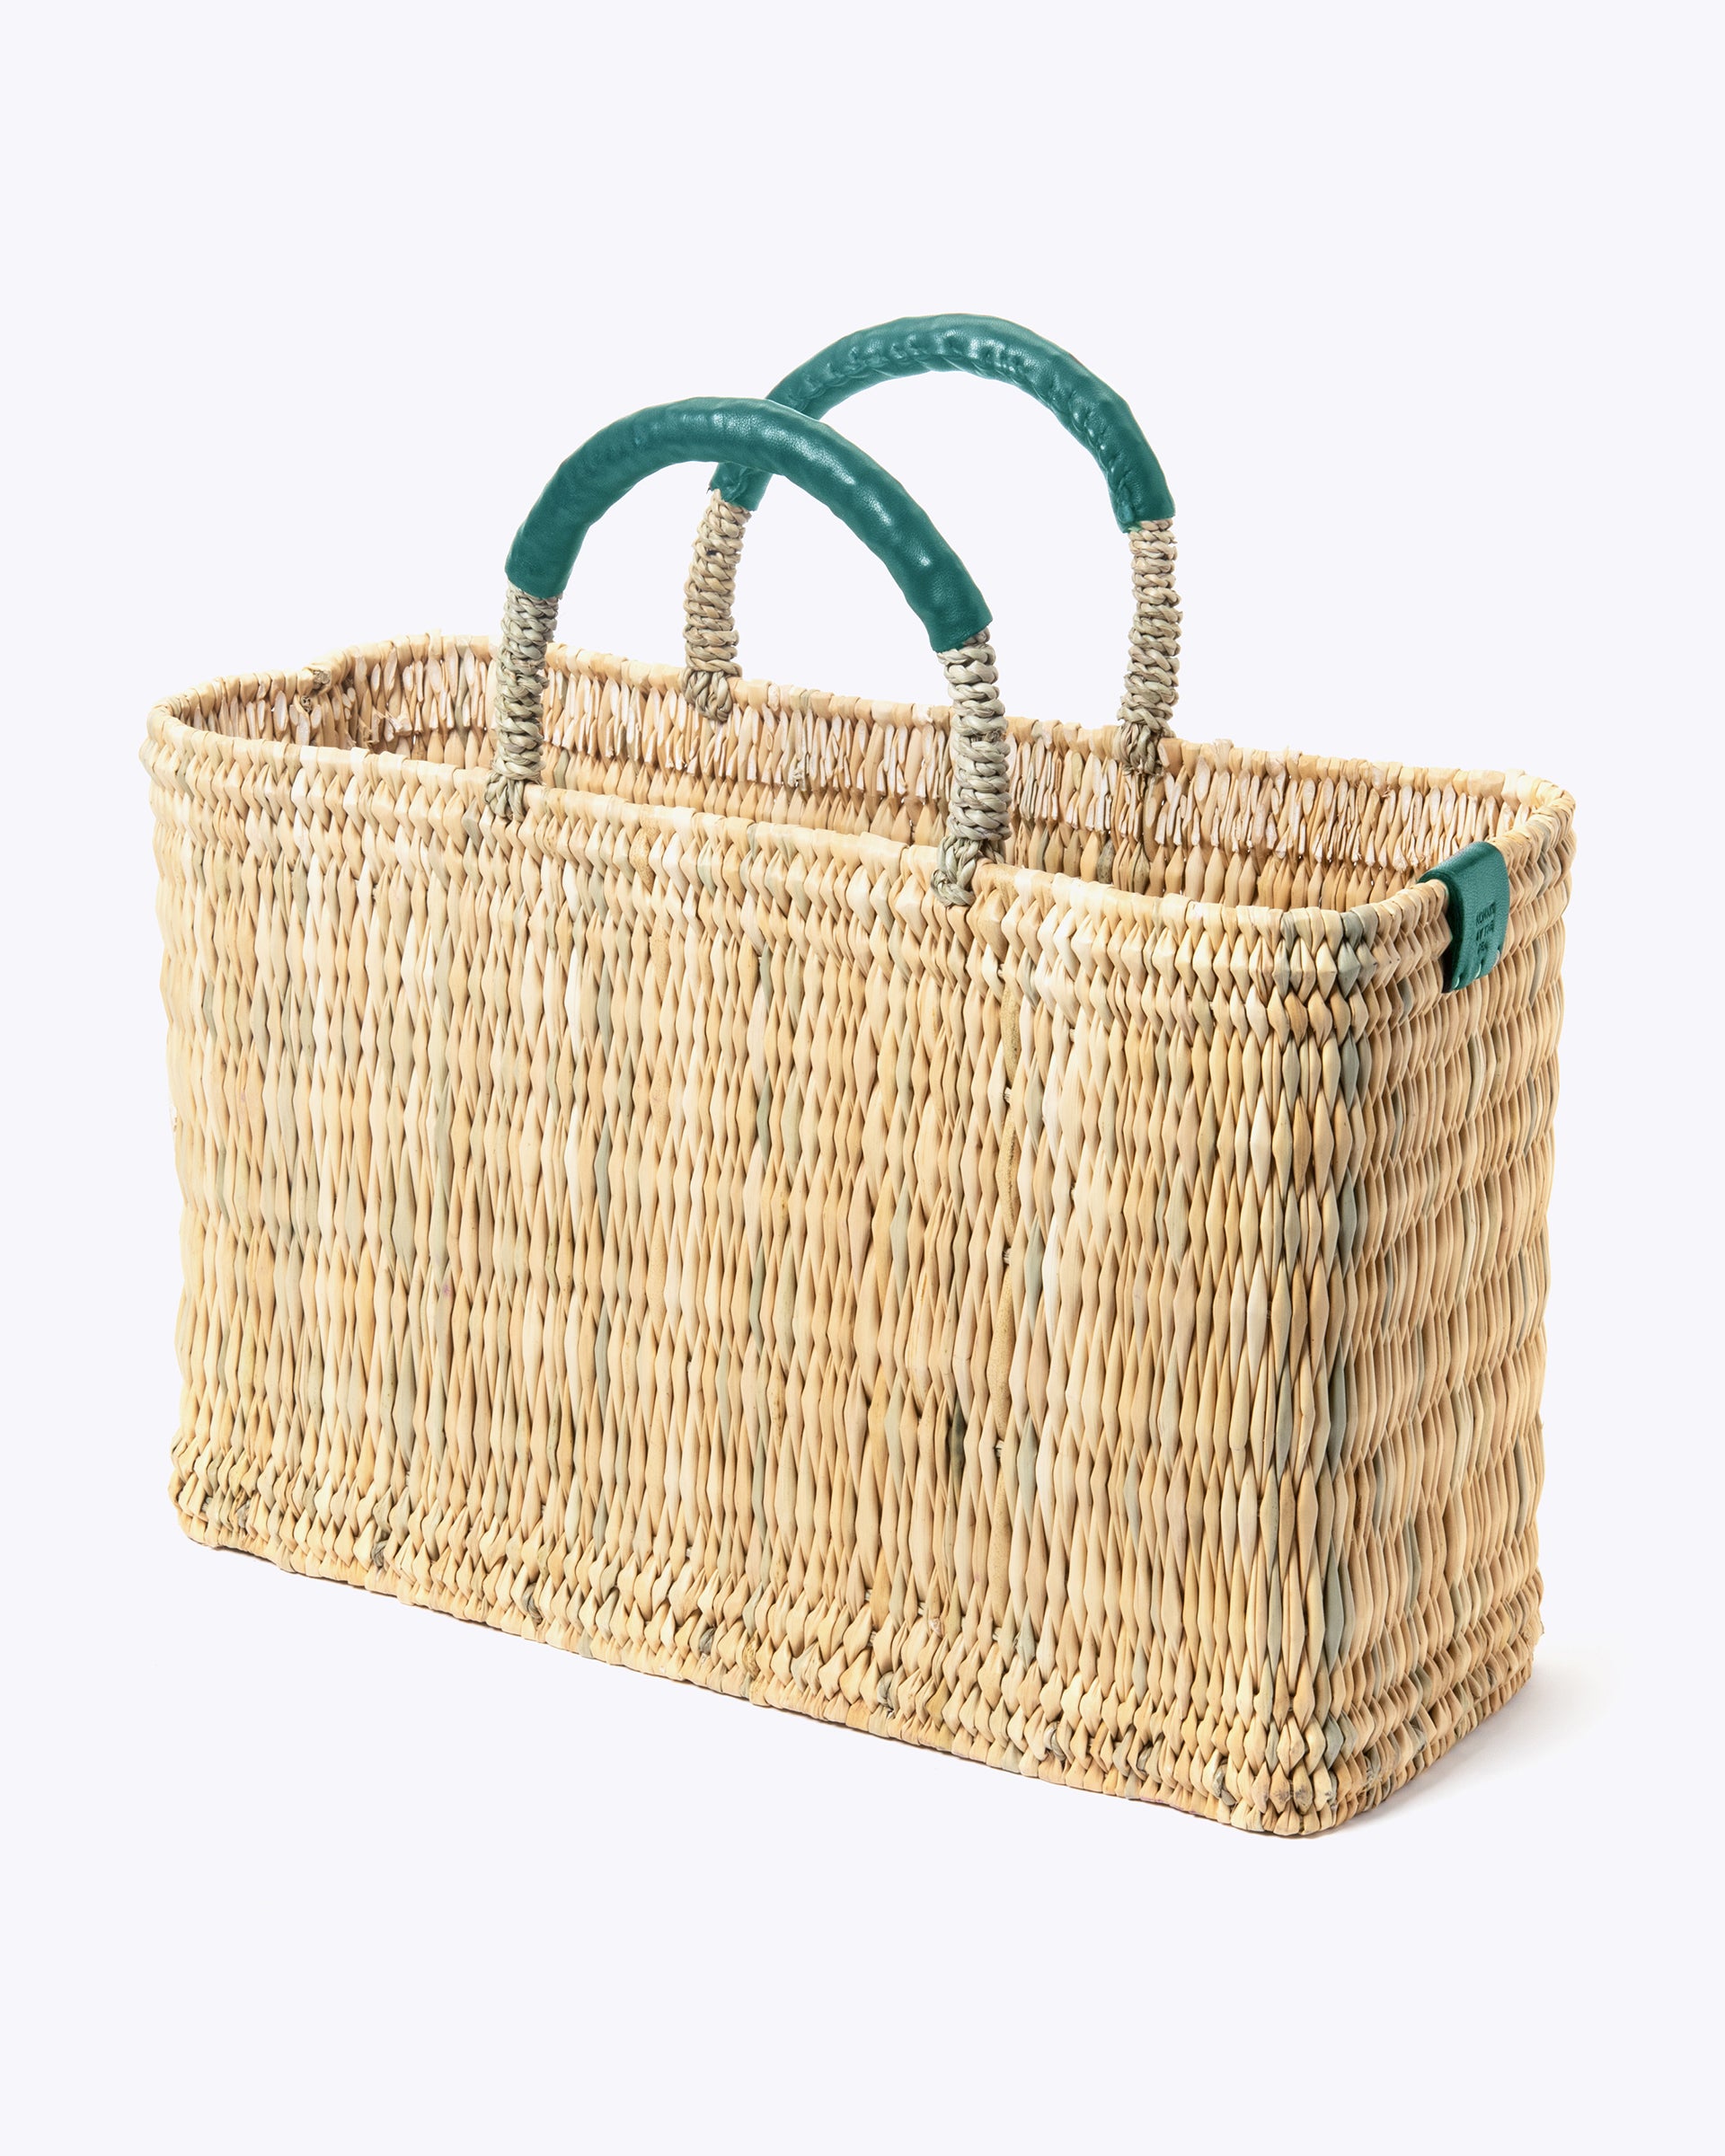 medium straw basket with jade leather handles and  imprint of always by the sea on a white background